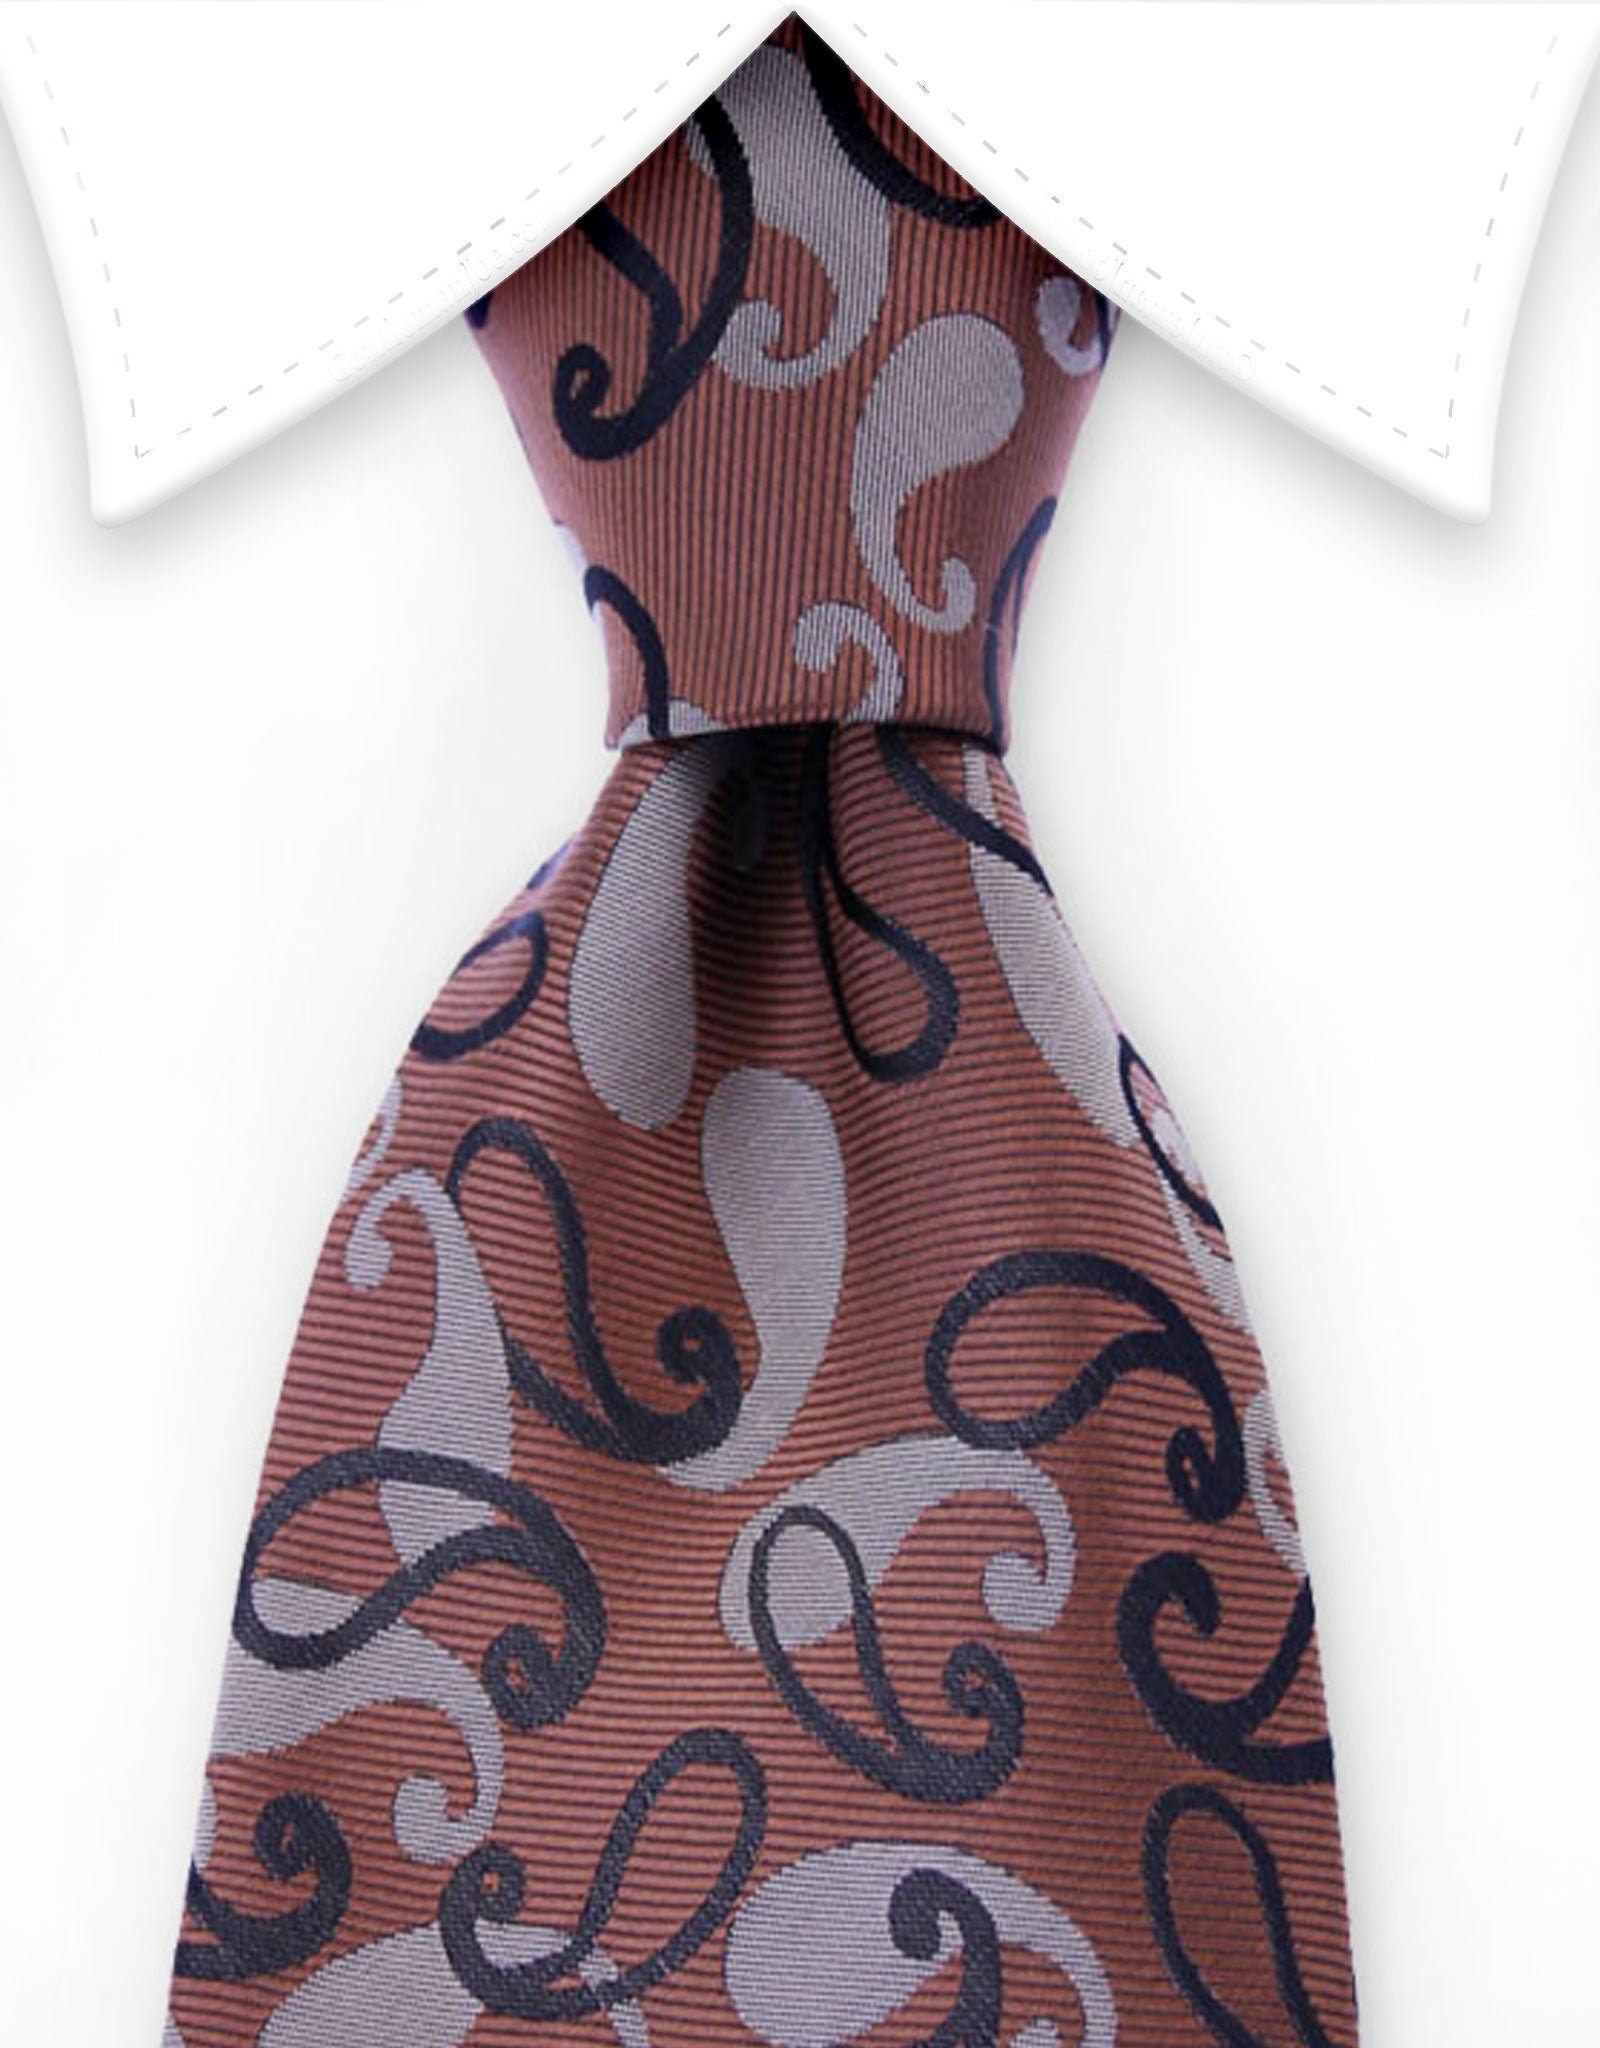 brown tie with small black paisley design